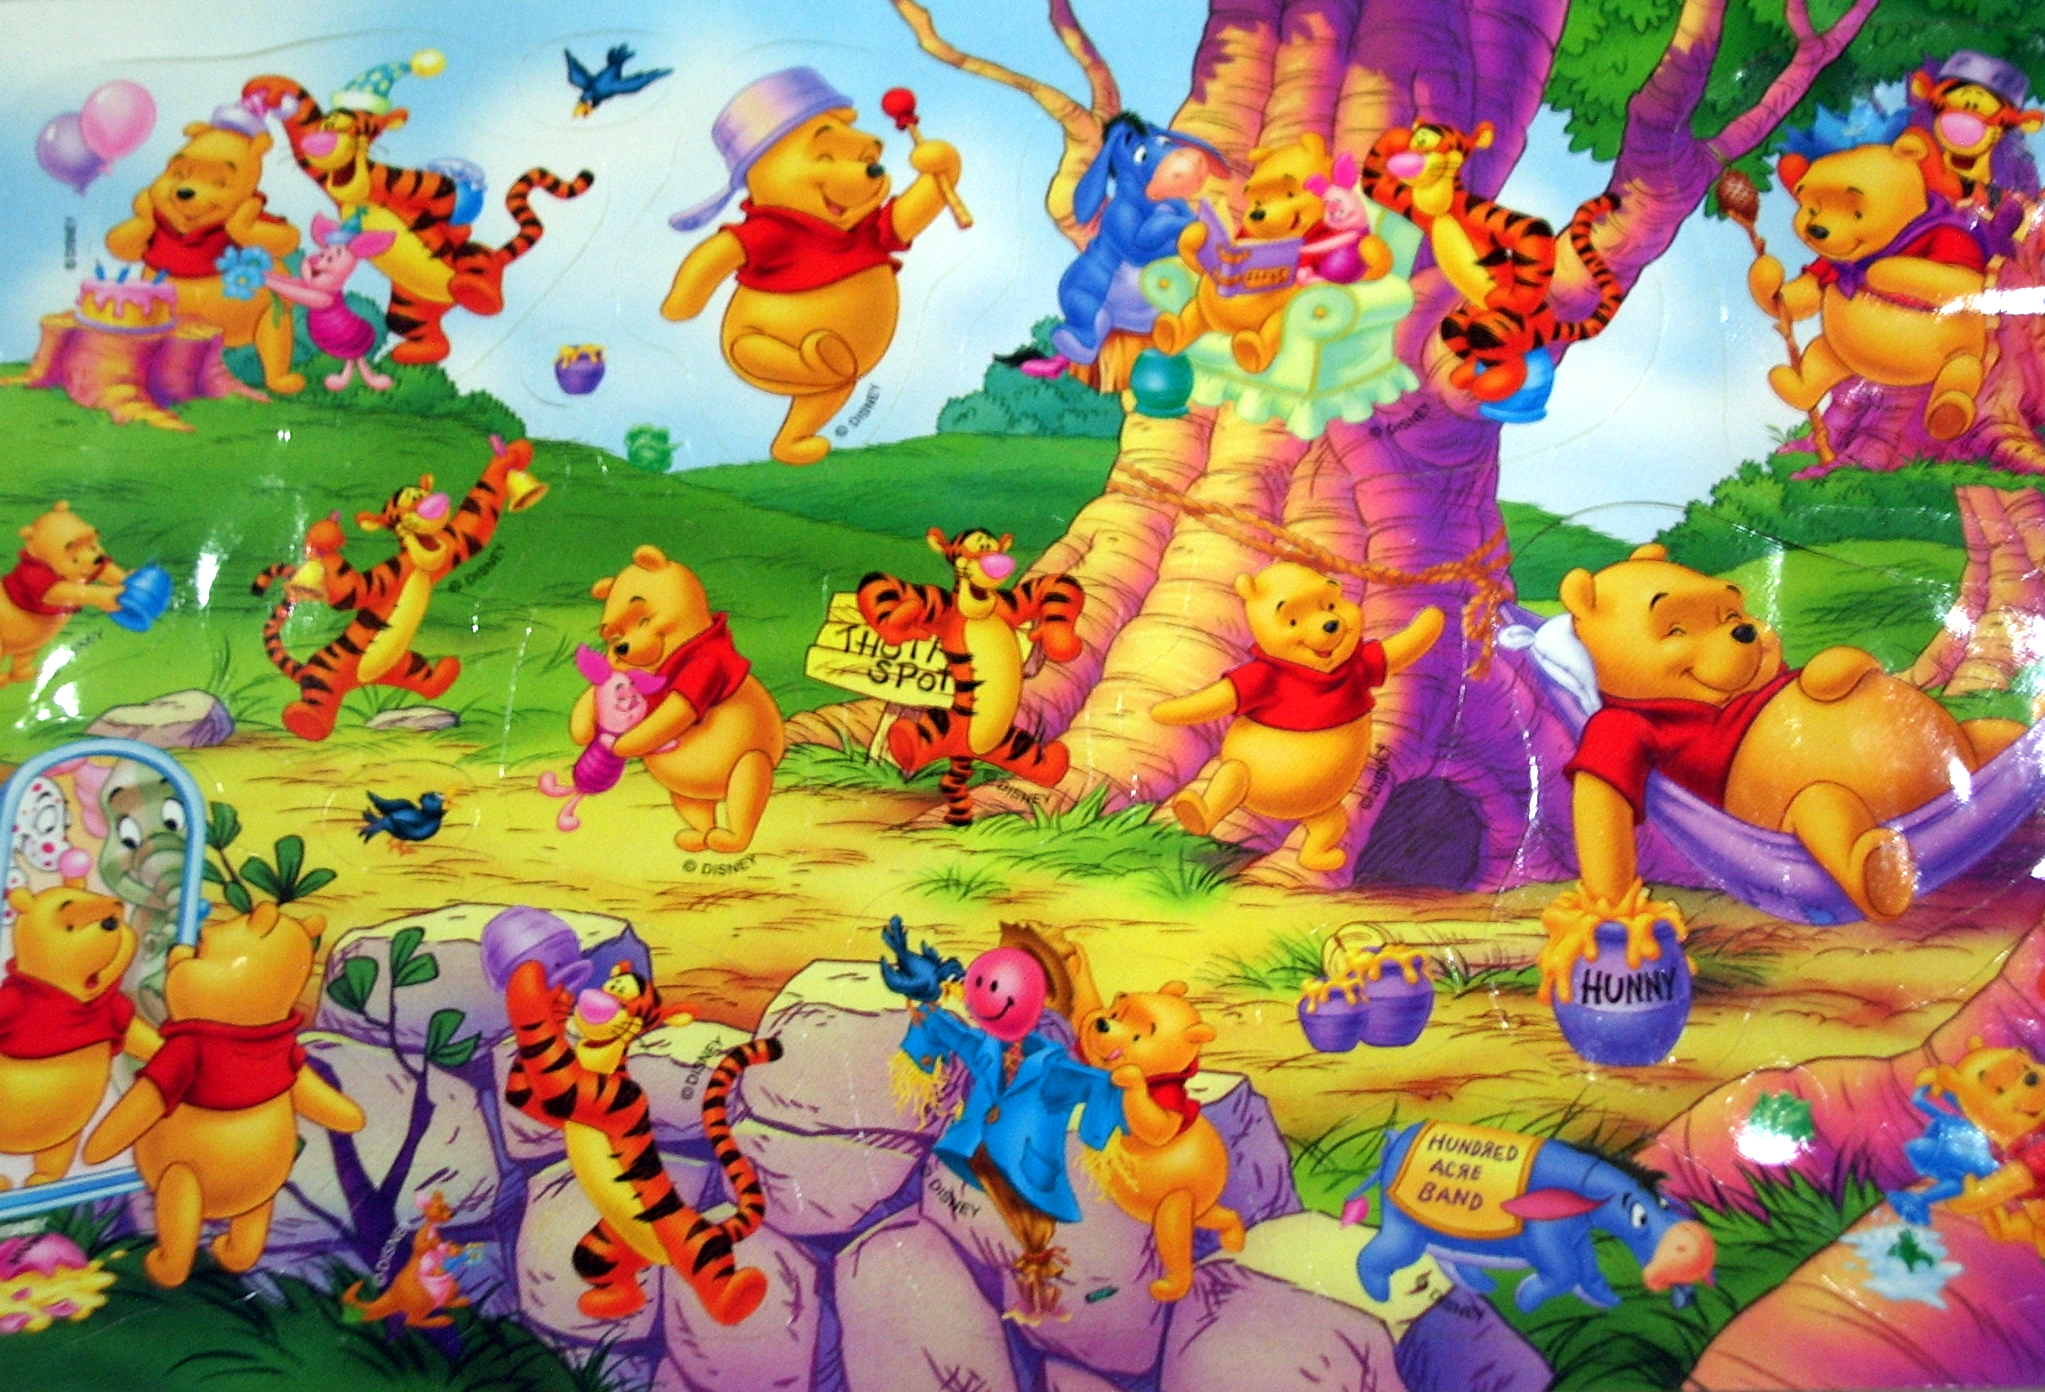 Winnie The Pooh Backgrounds, Pictures, Images